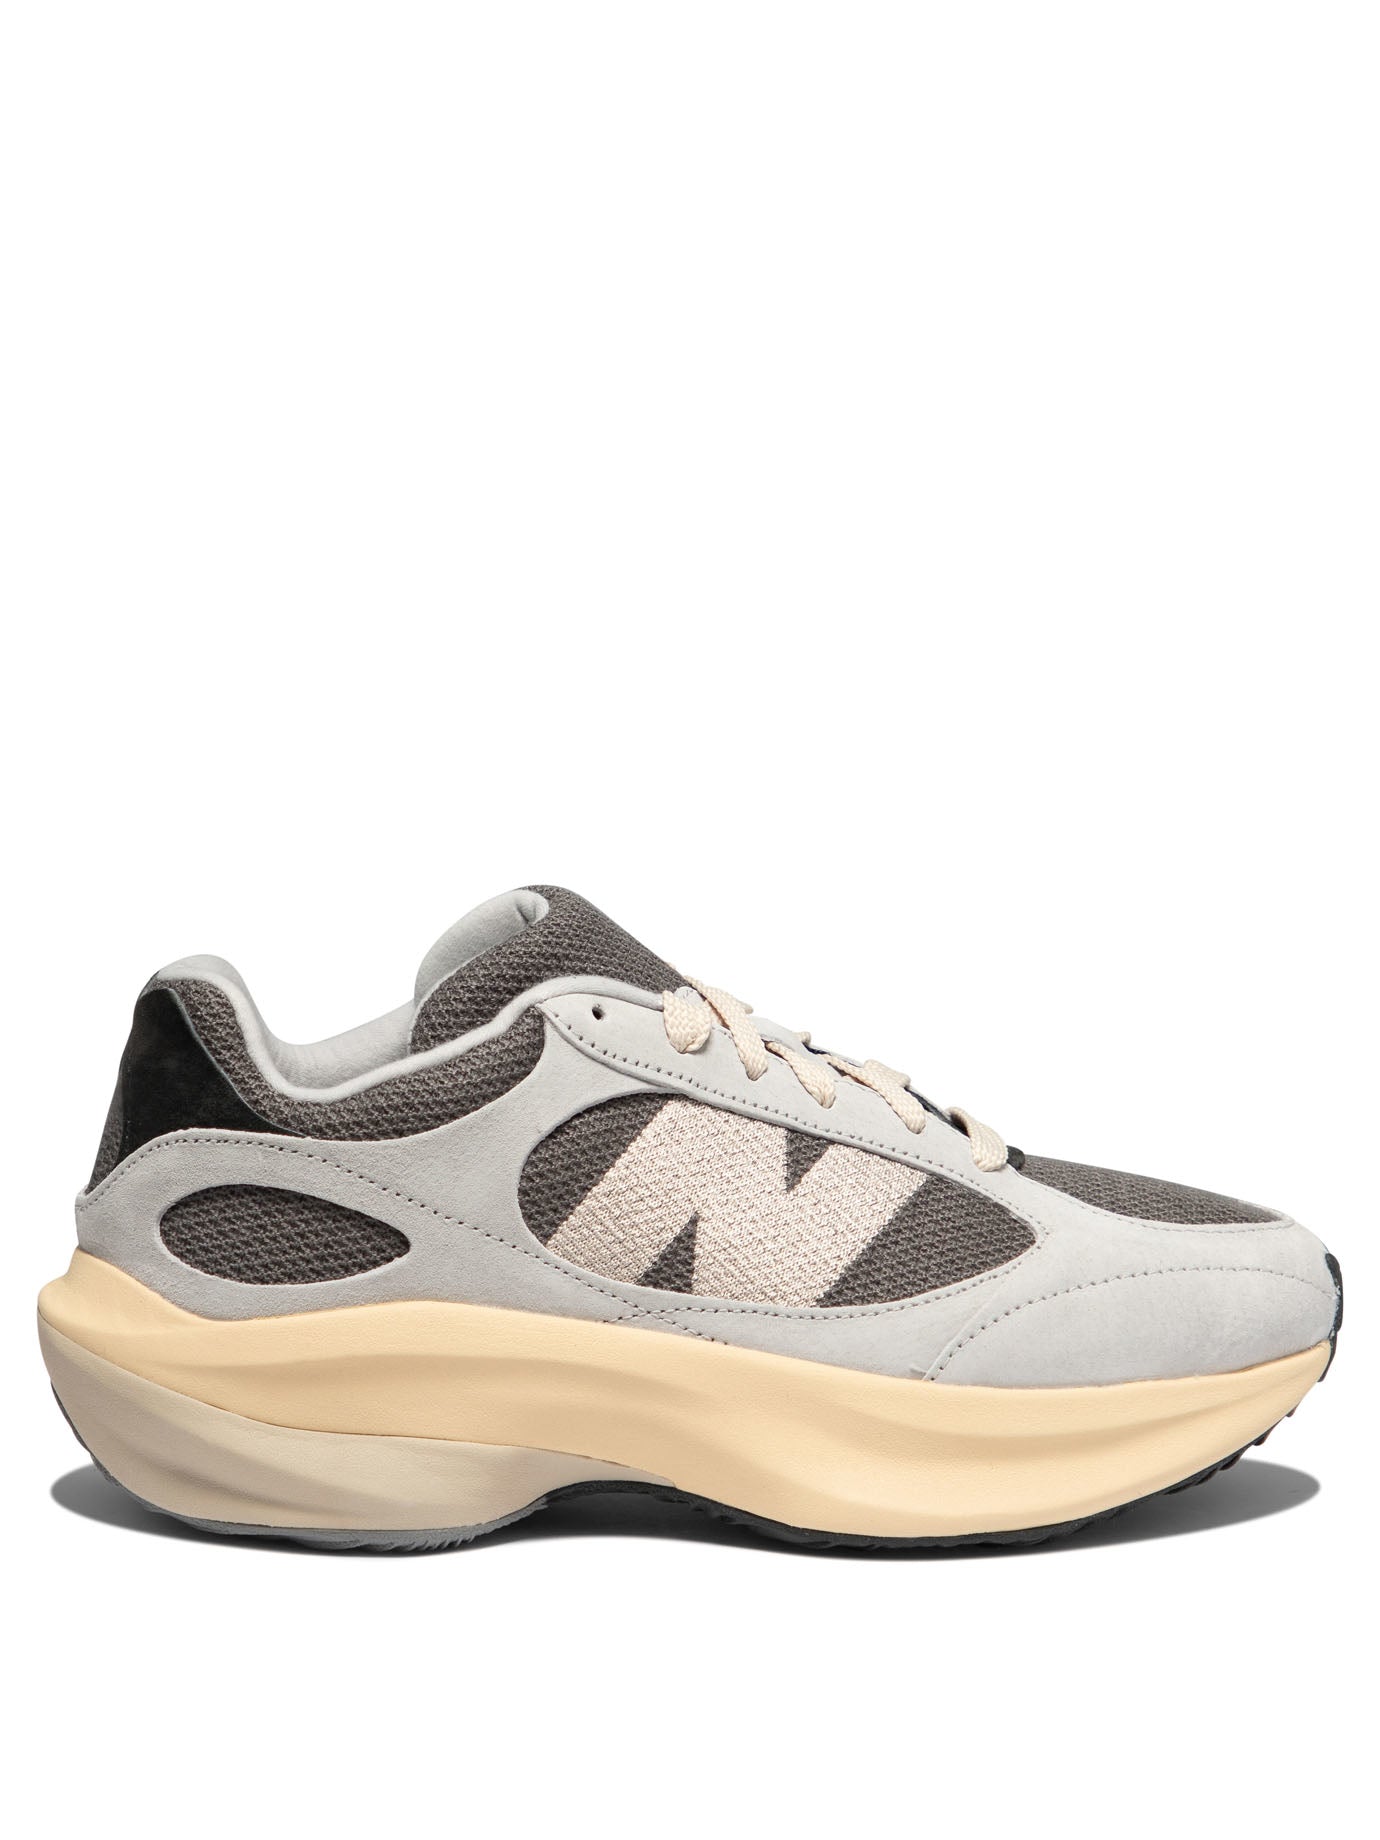 New Balance "wrpd Runner" Sneakers